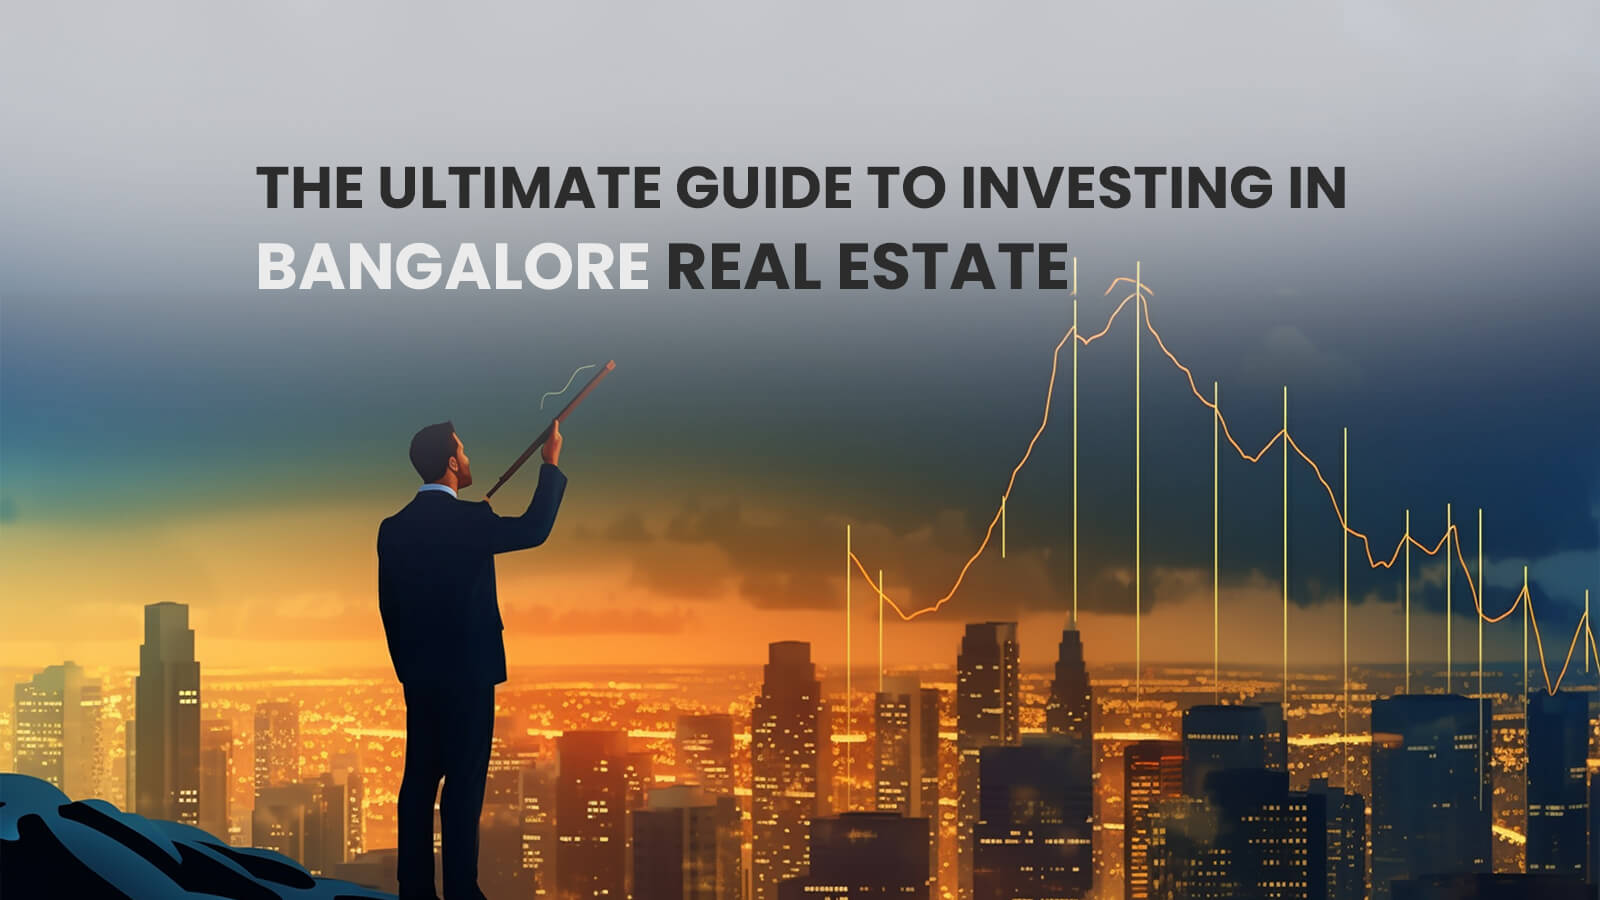 The Ultimate Guide To Investing in Bangalore Real Estate